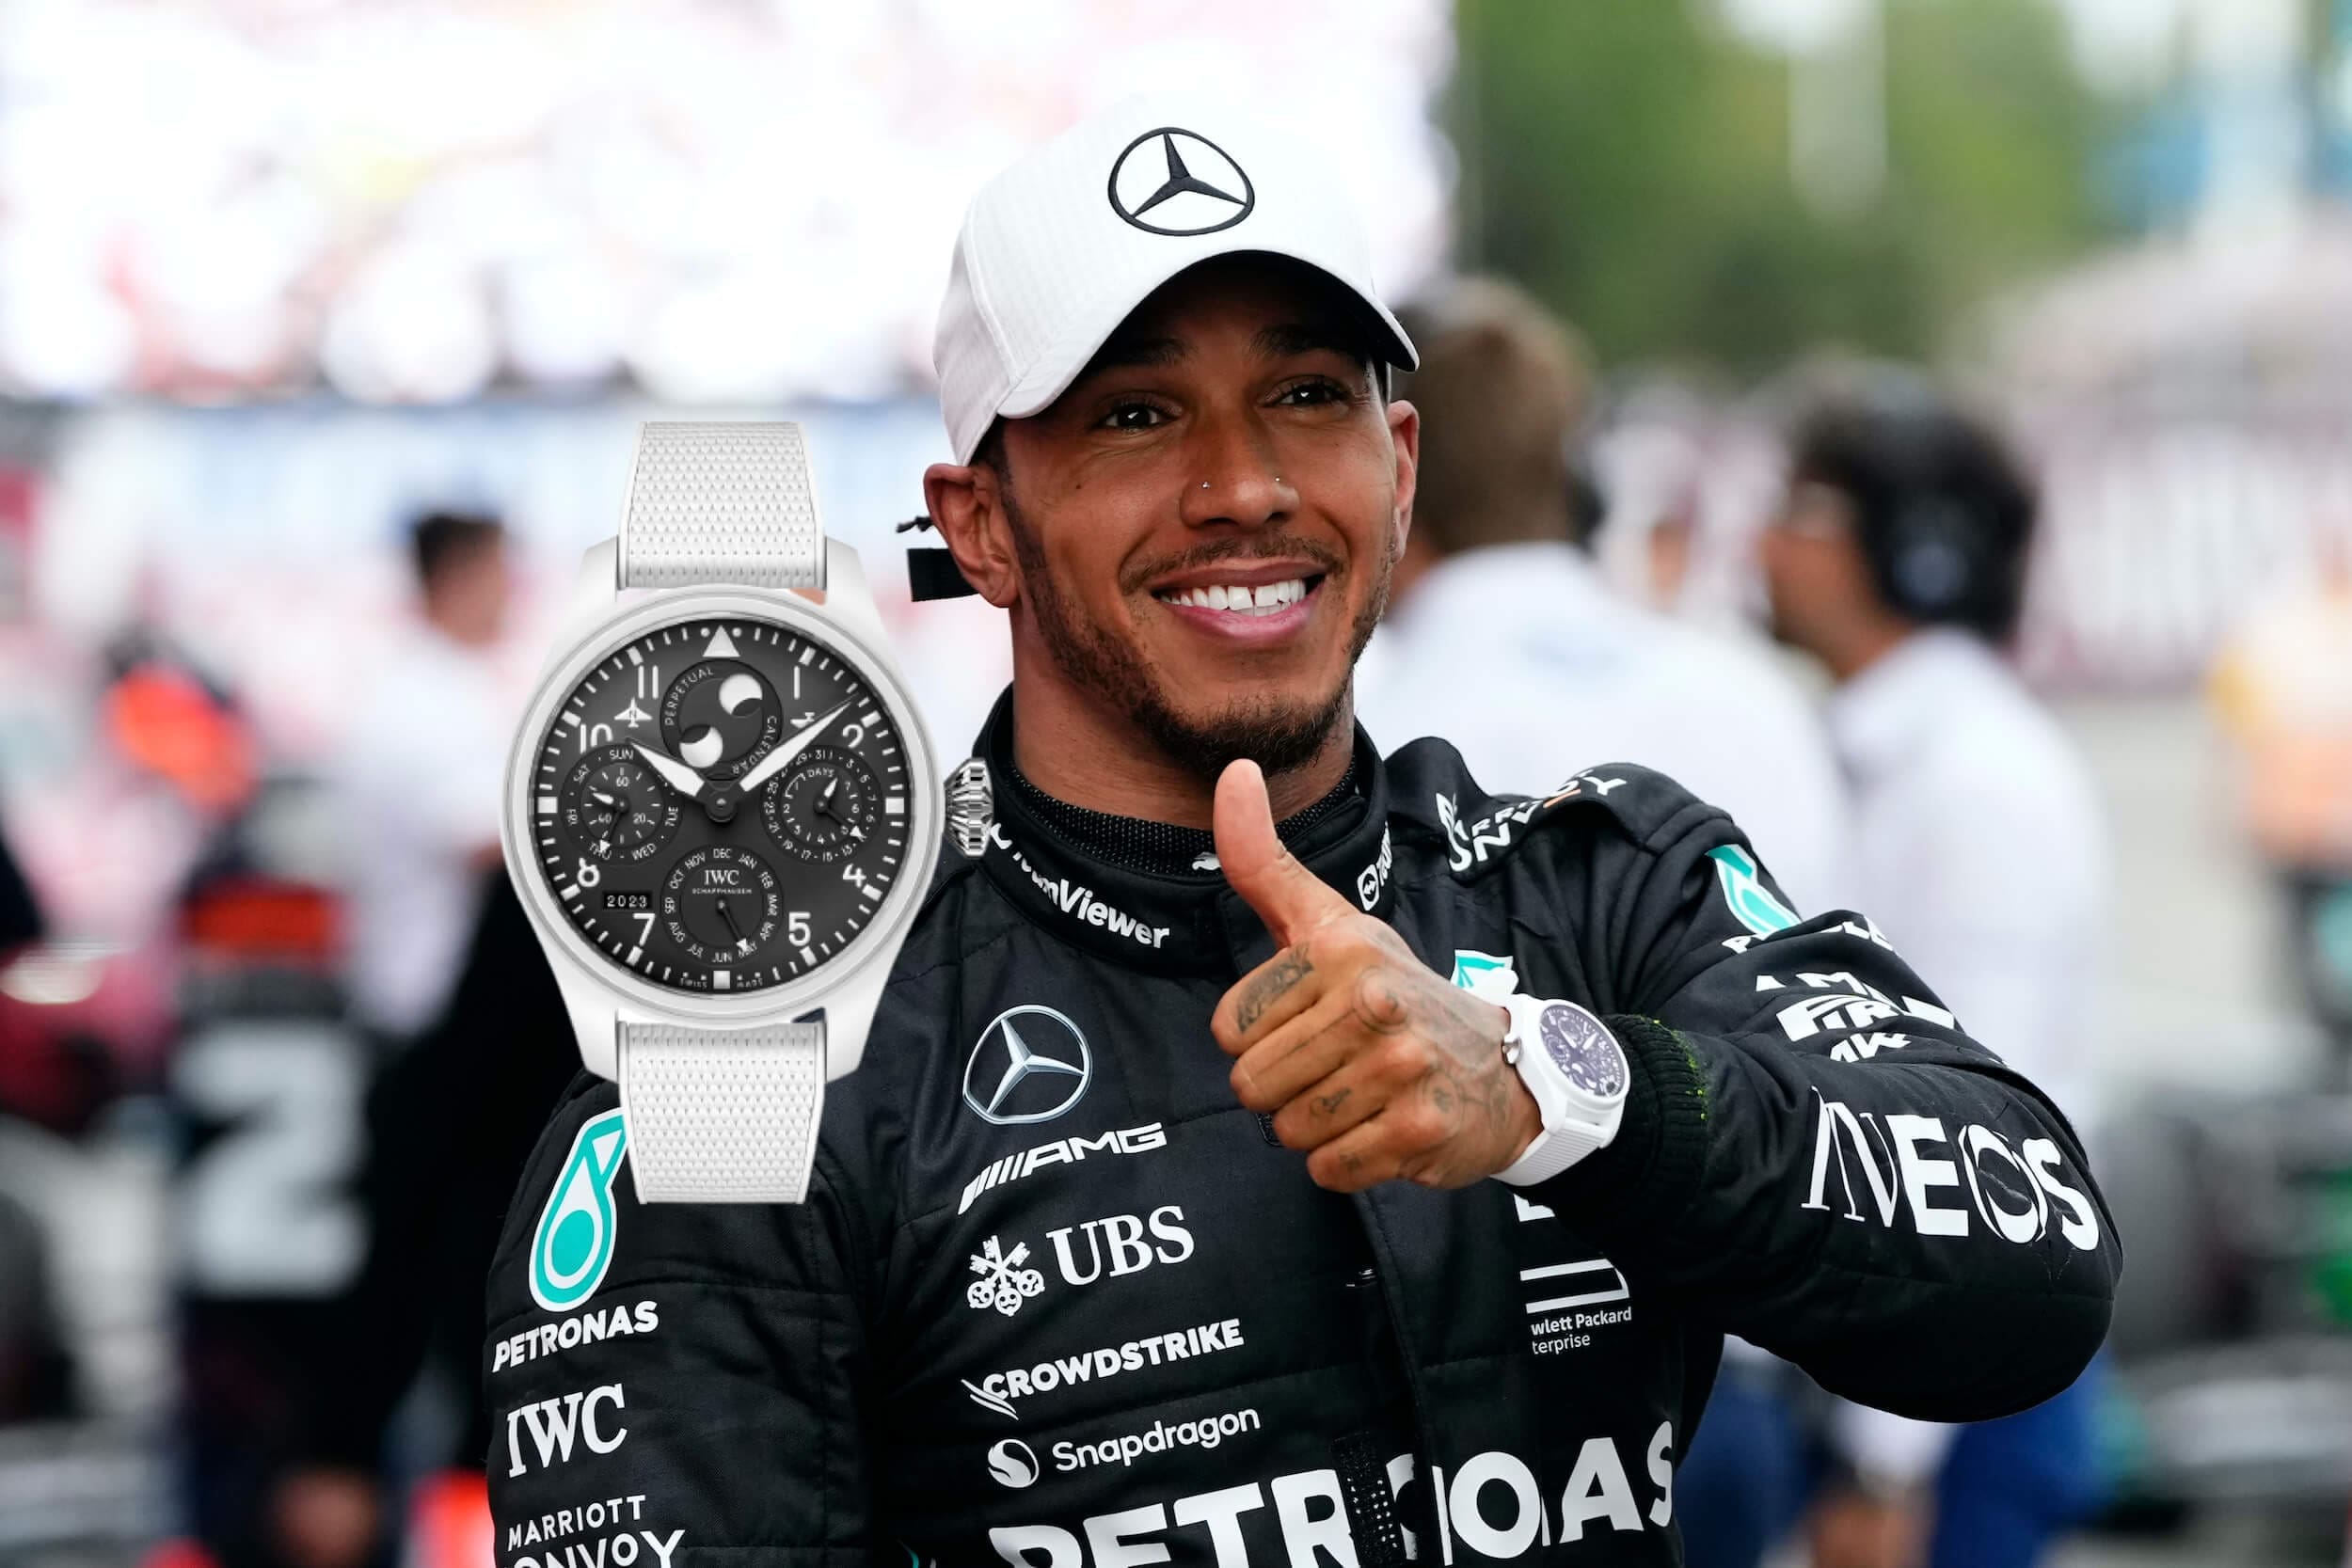 Remember that unreleased IWC Big Pilot Perpetual Calendar Lake Tahoe Lewis Hamilton was caught wearing? Well, it’s out now!